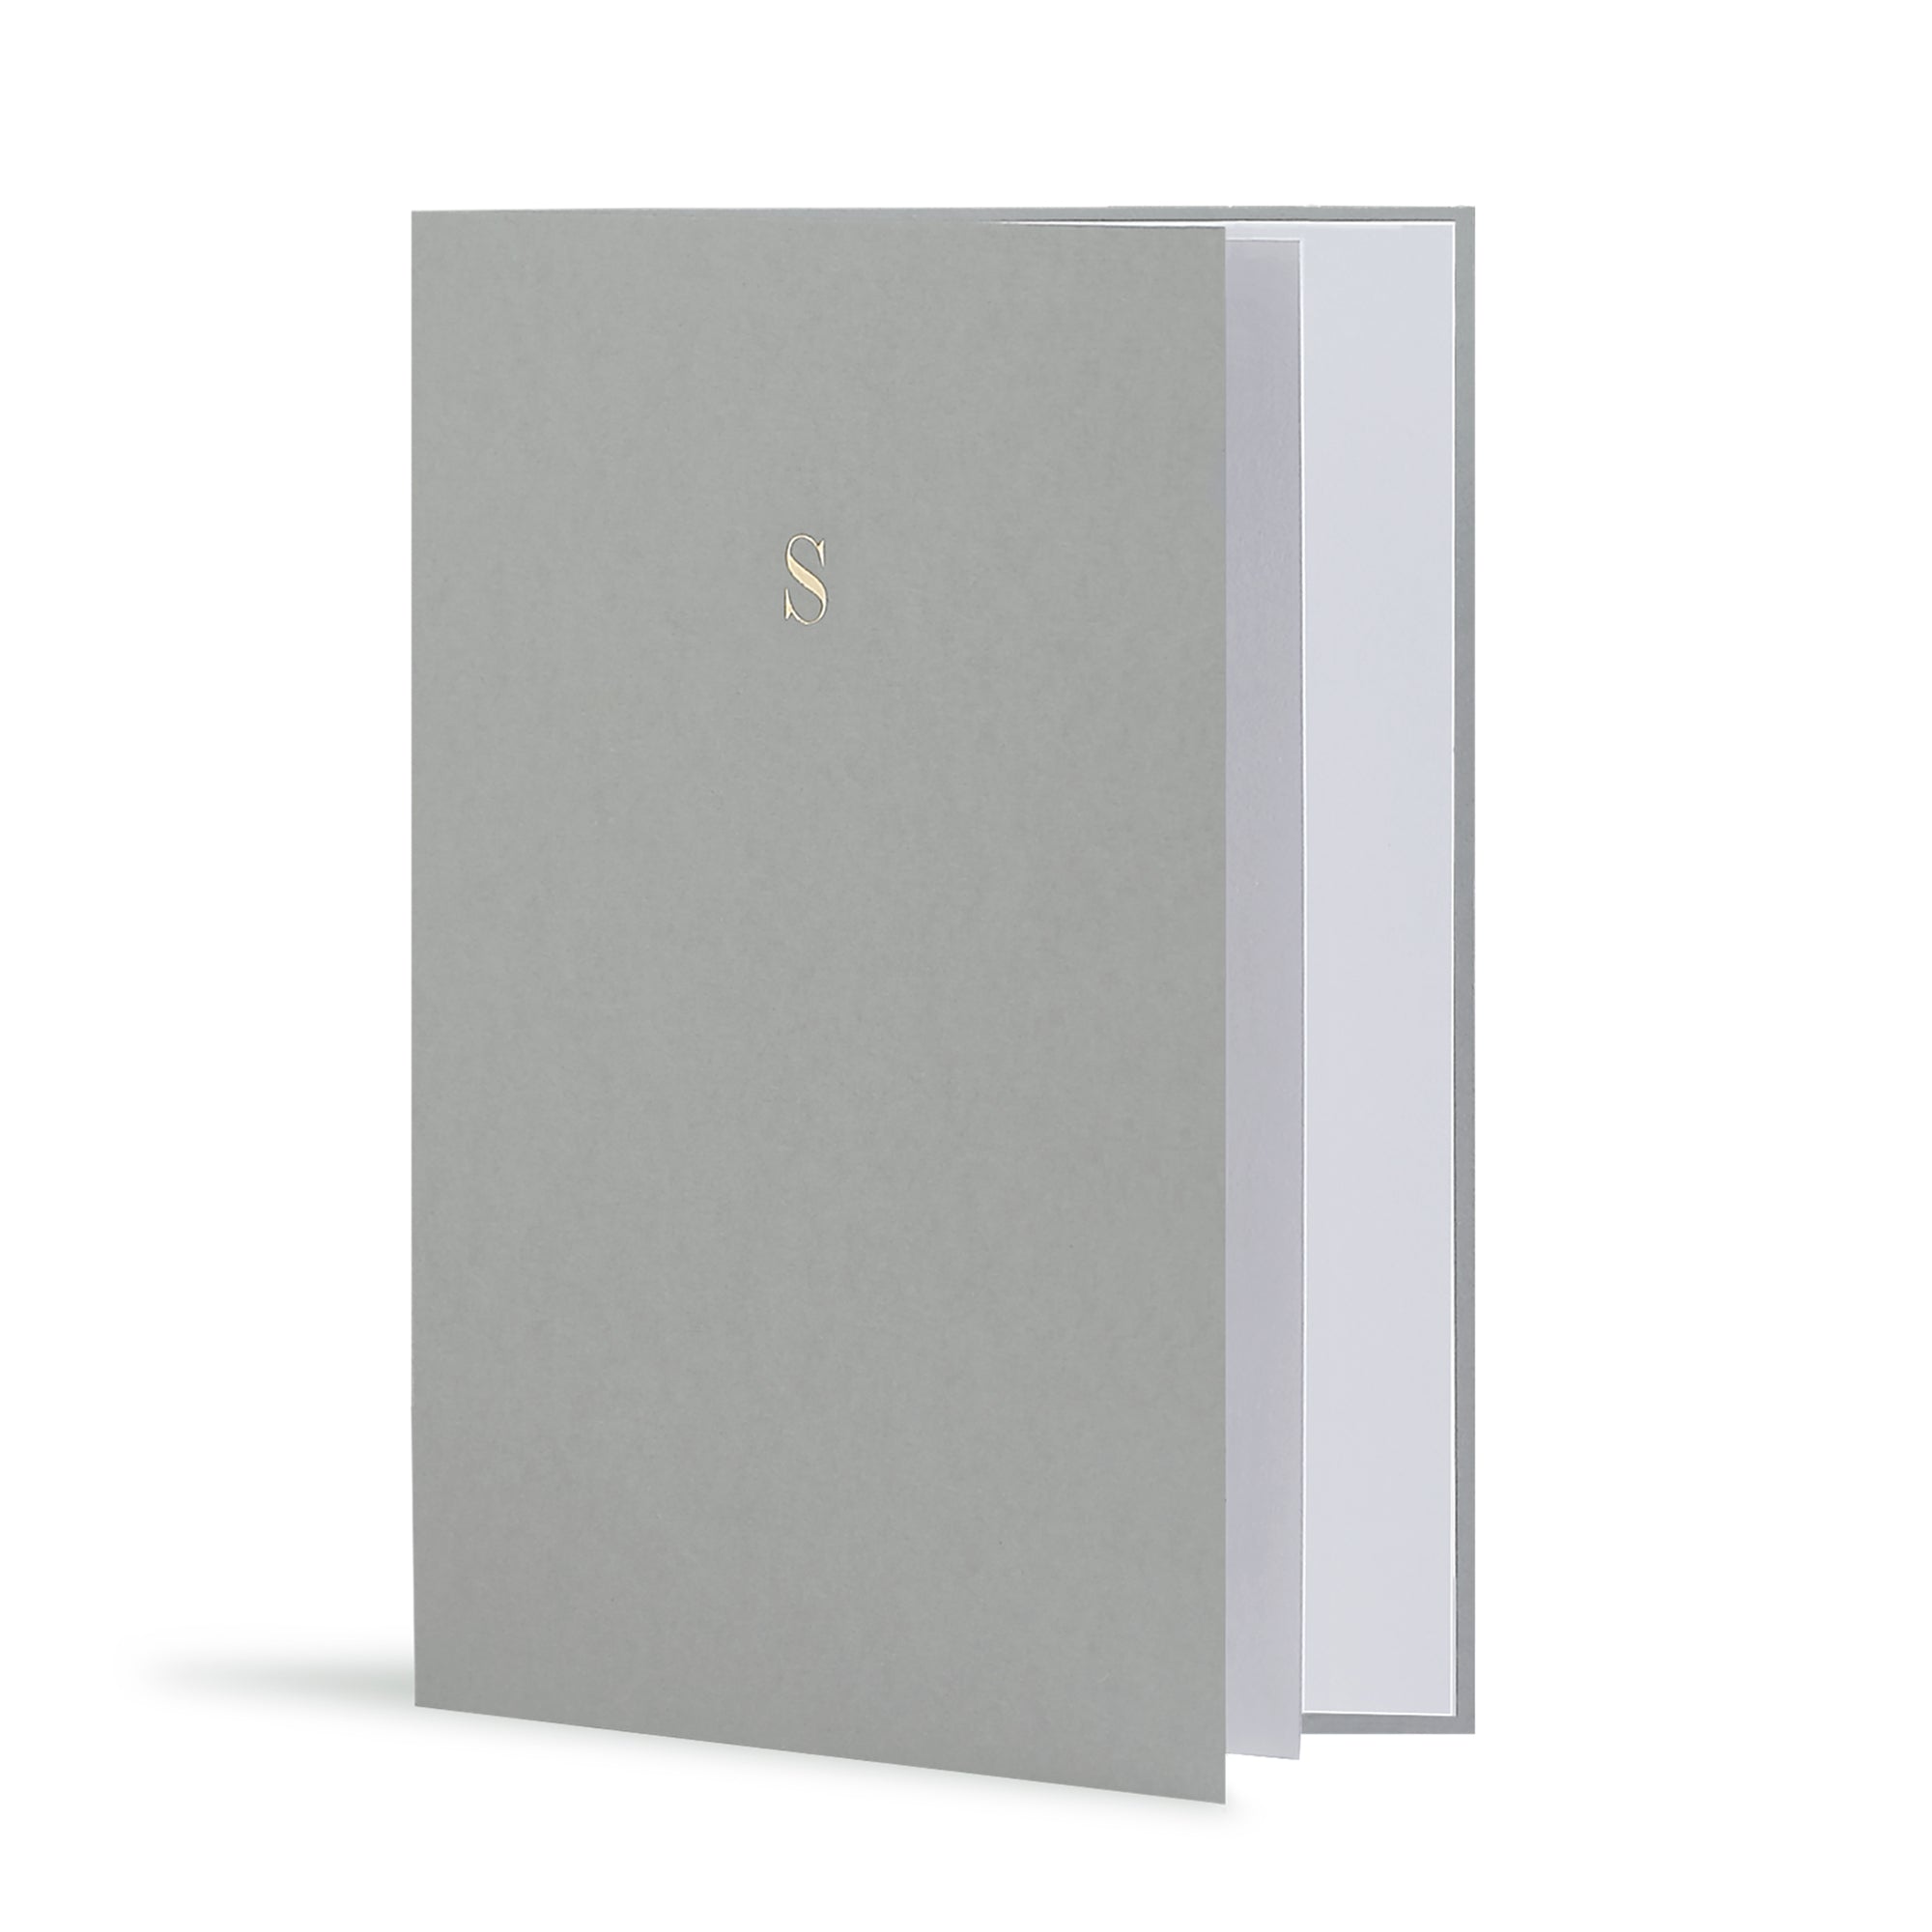 S Greeting Card in Grey, Side | Story of Elegance